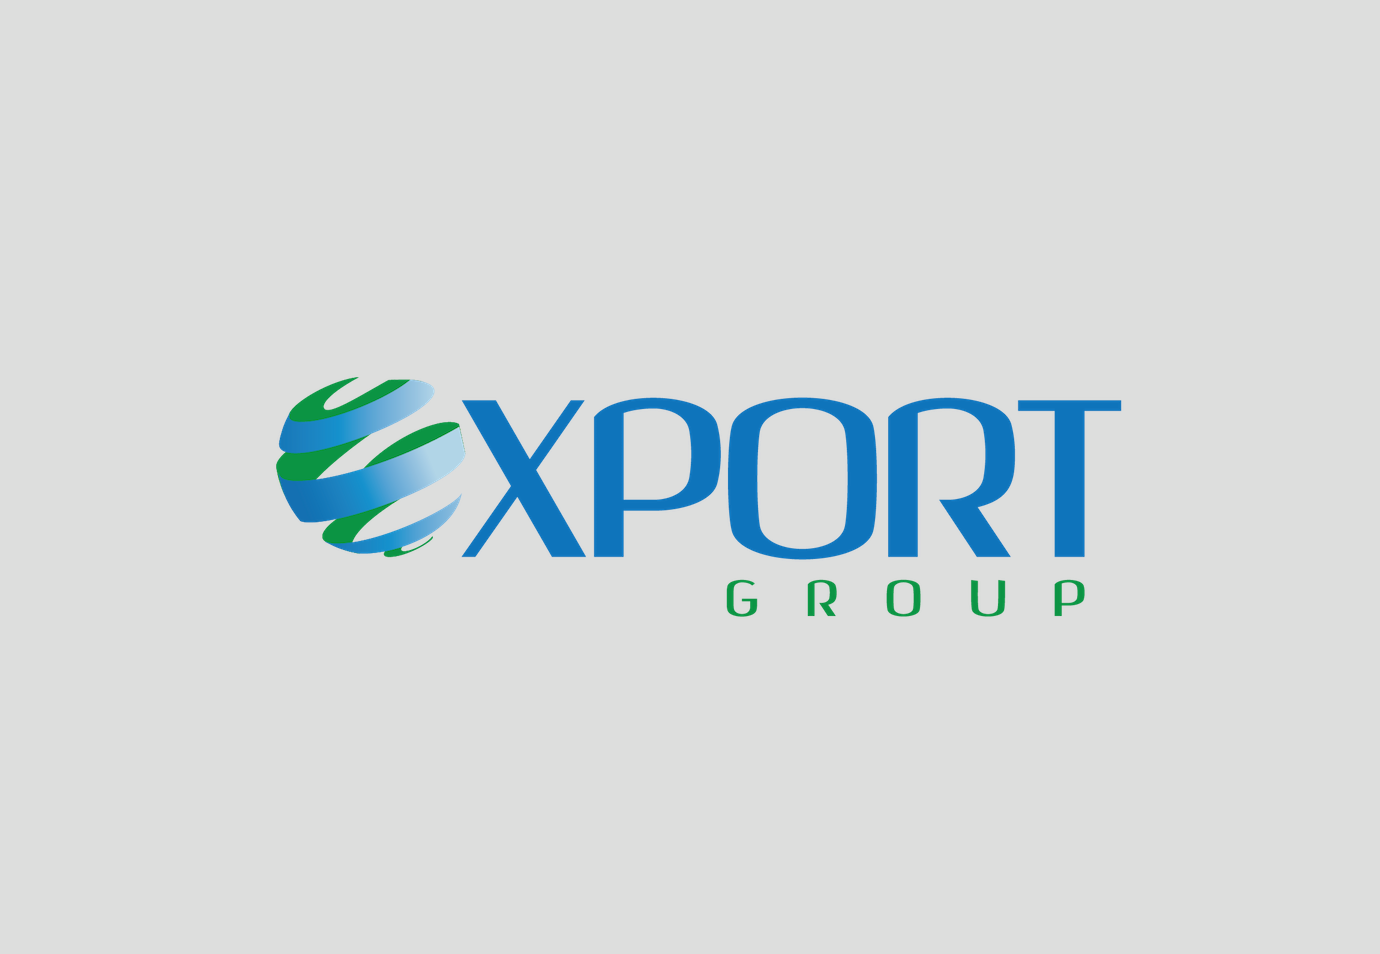 Xport Group